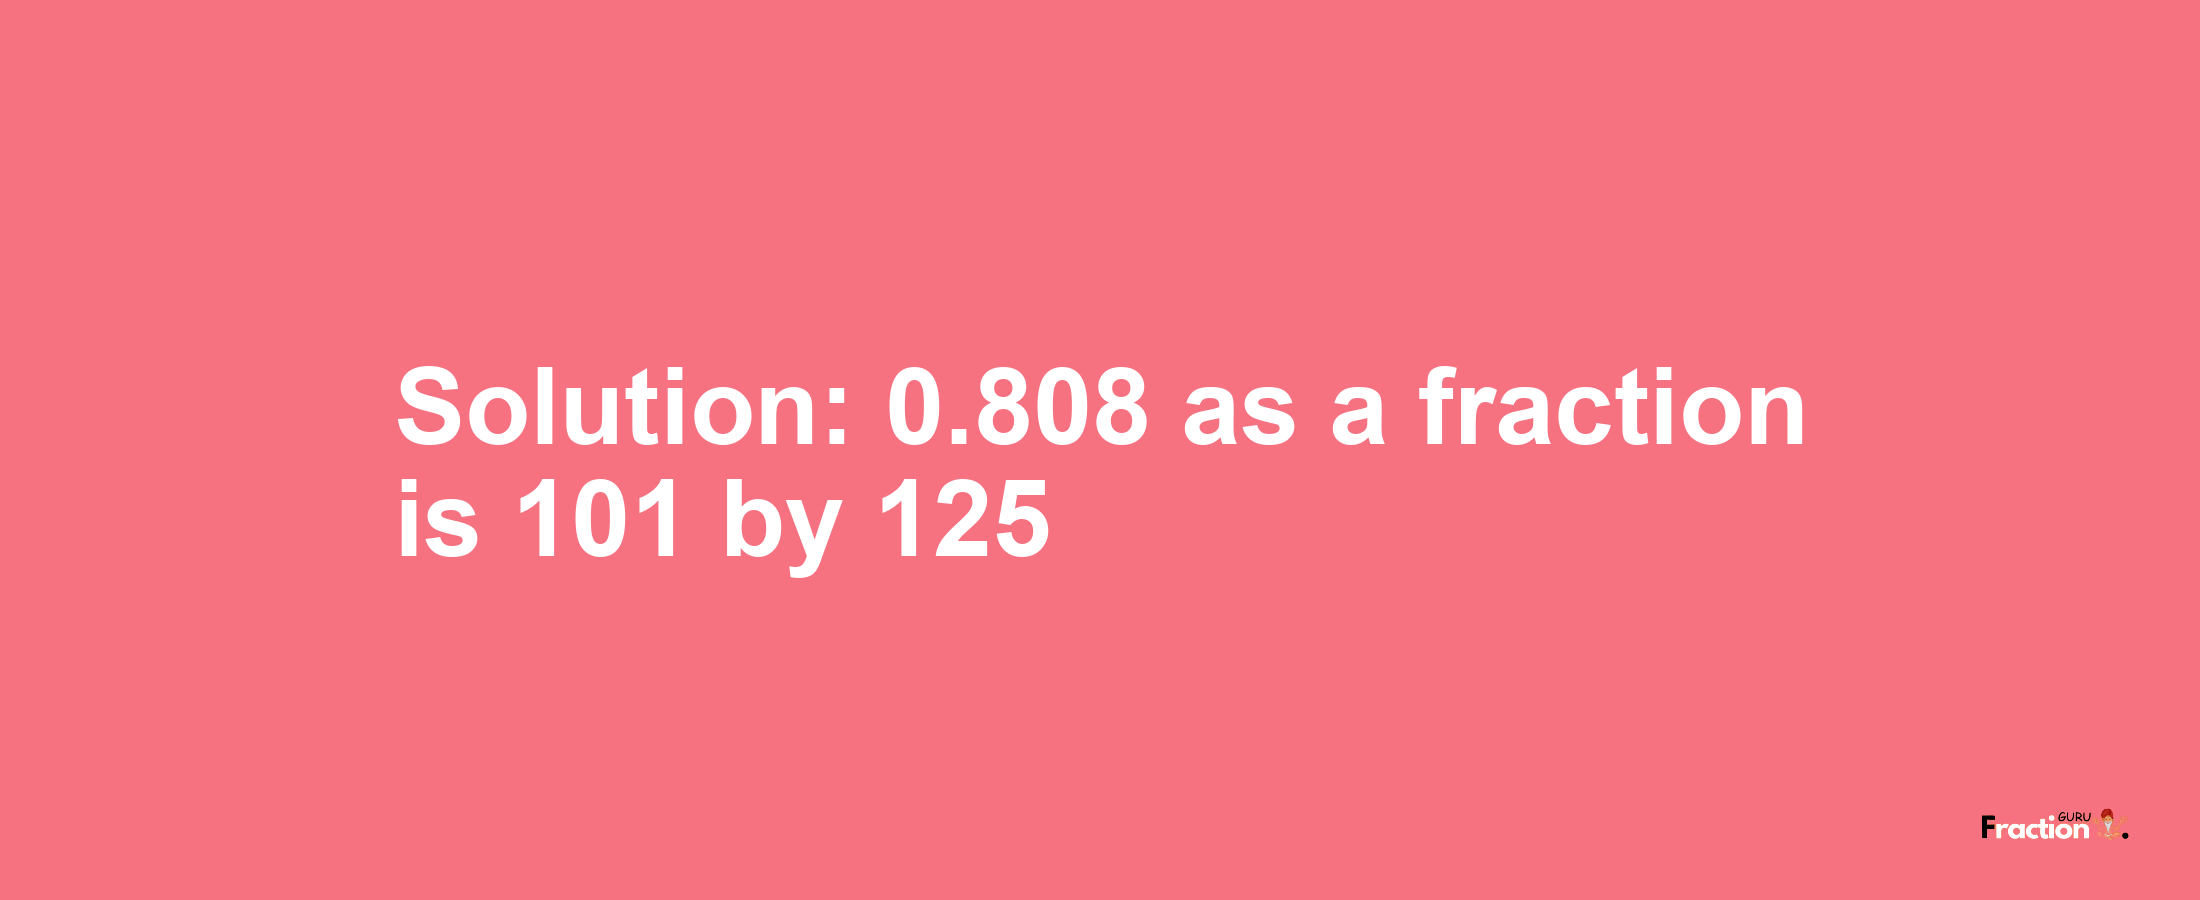 Solution:0.808 as a fraction is 101/125